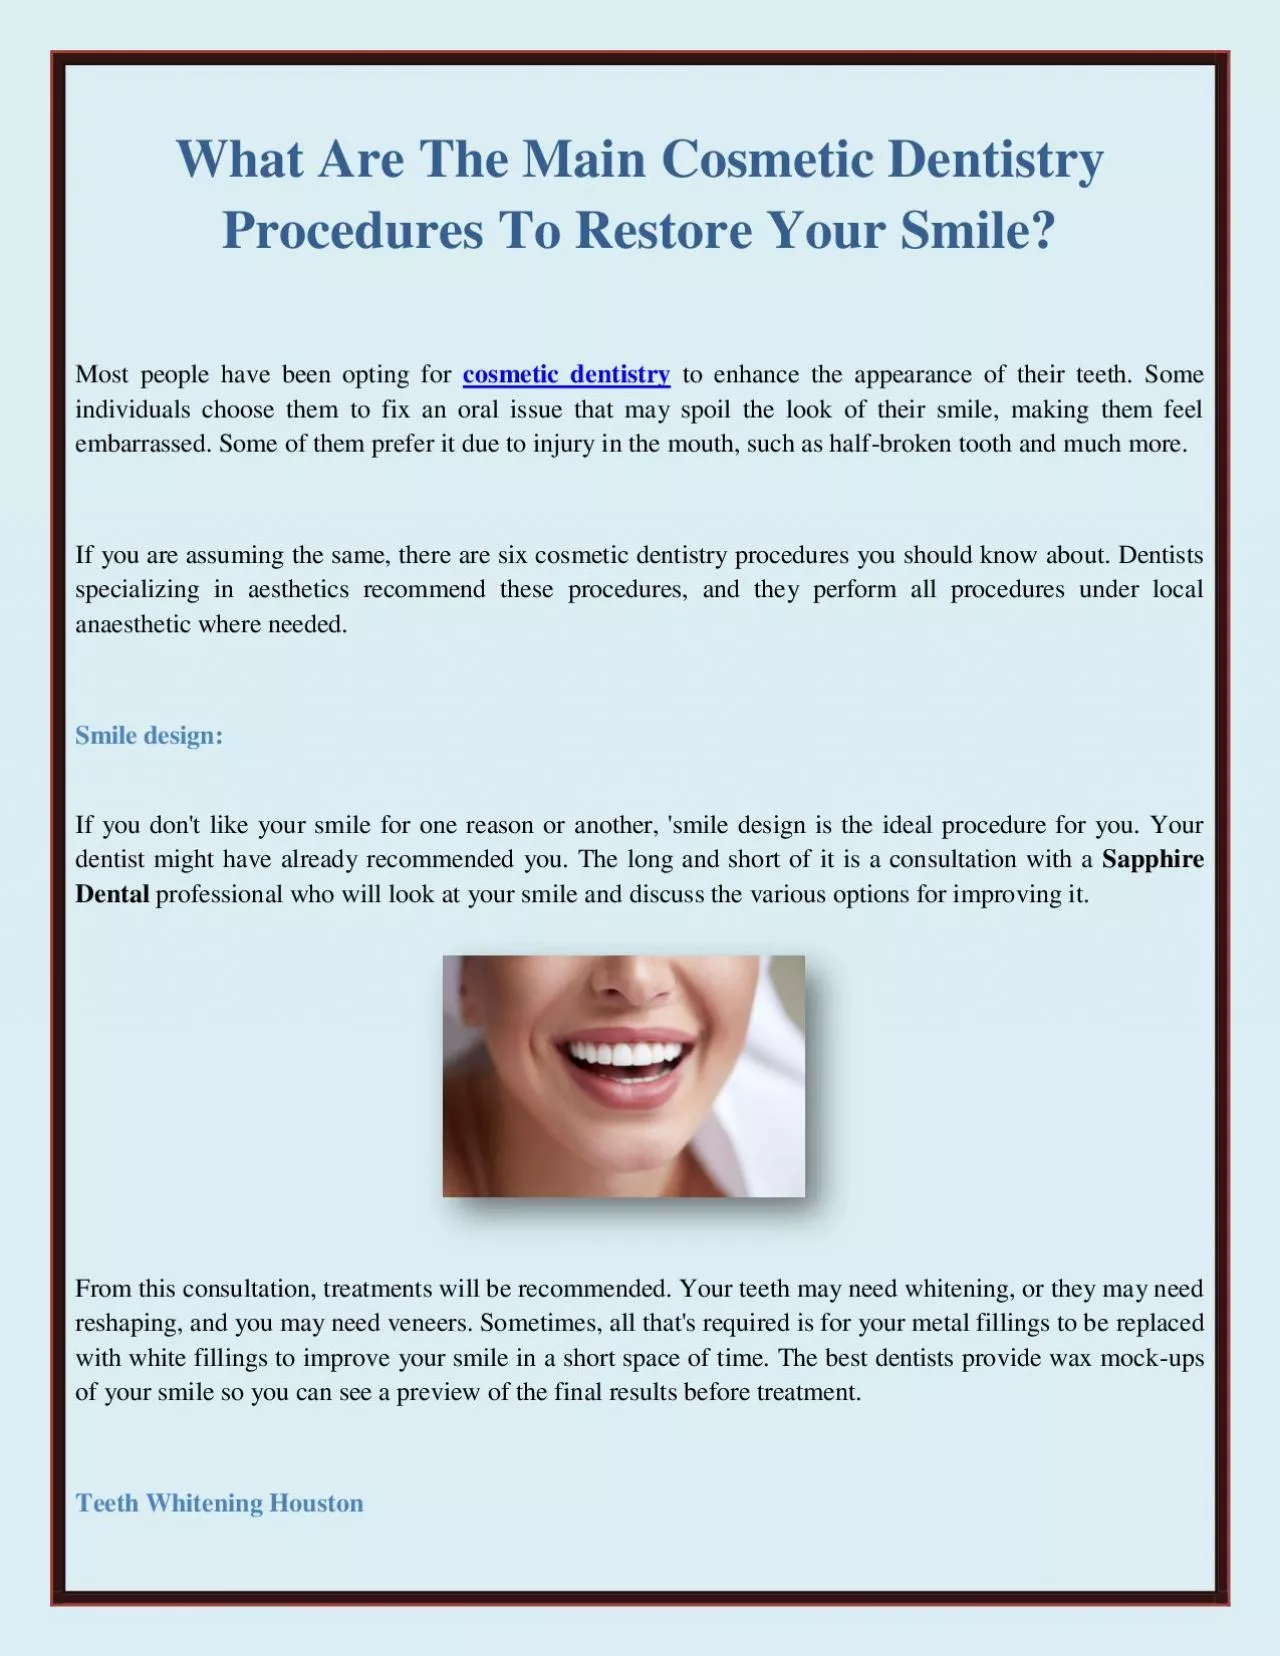 What Are The Main Cosmetic Dentistry Procedures To Restore Your Smile?